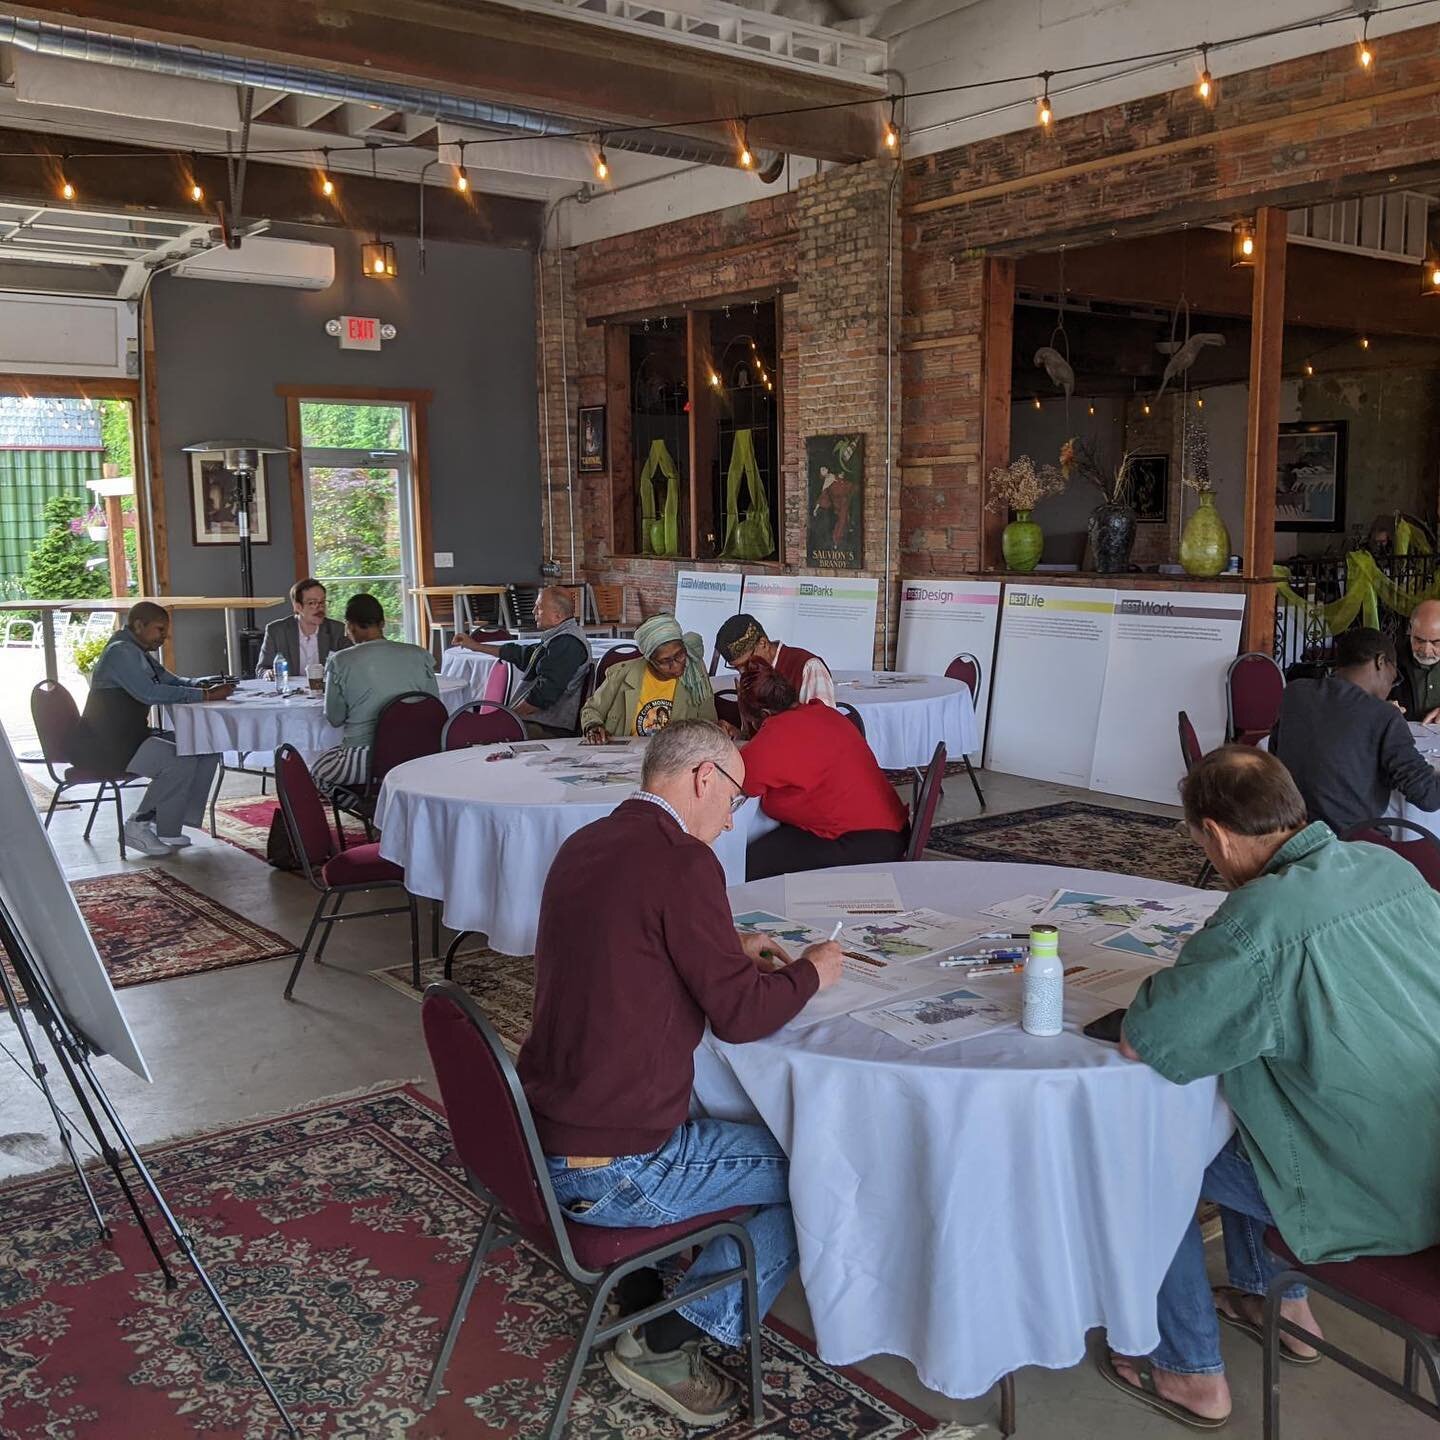 We&rsquo;re back at it for Day 2 of Best Benton Harbor Planning Week! This morning, members of the public participated in visioning exercises for future land use in the city. Join us tonight at 7pm at @secretgardenattheharbor for the official Plannin